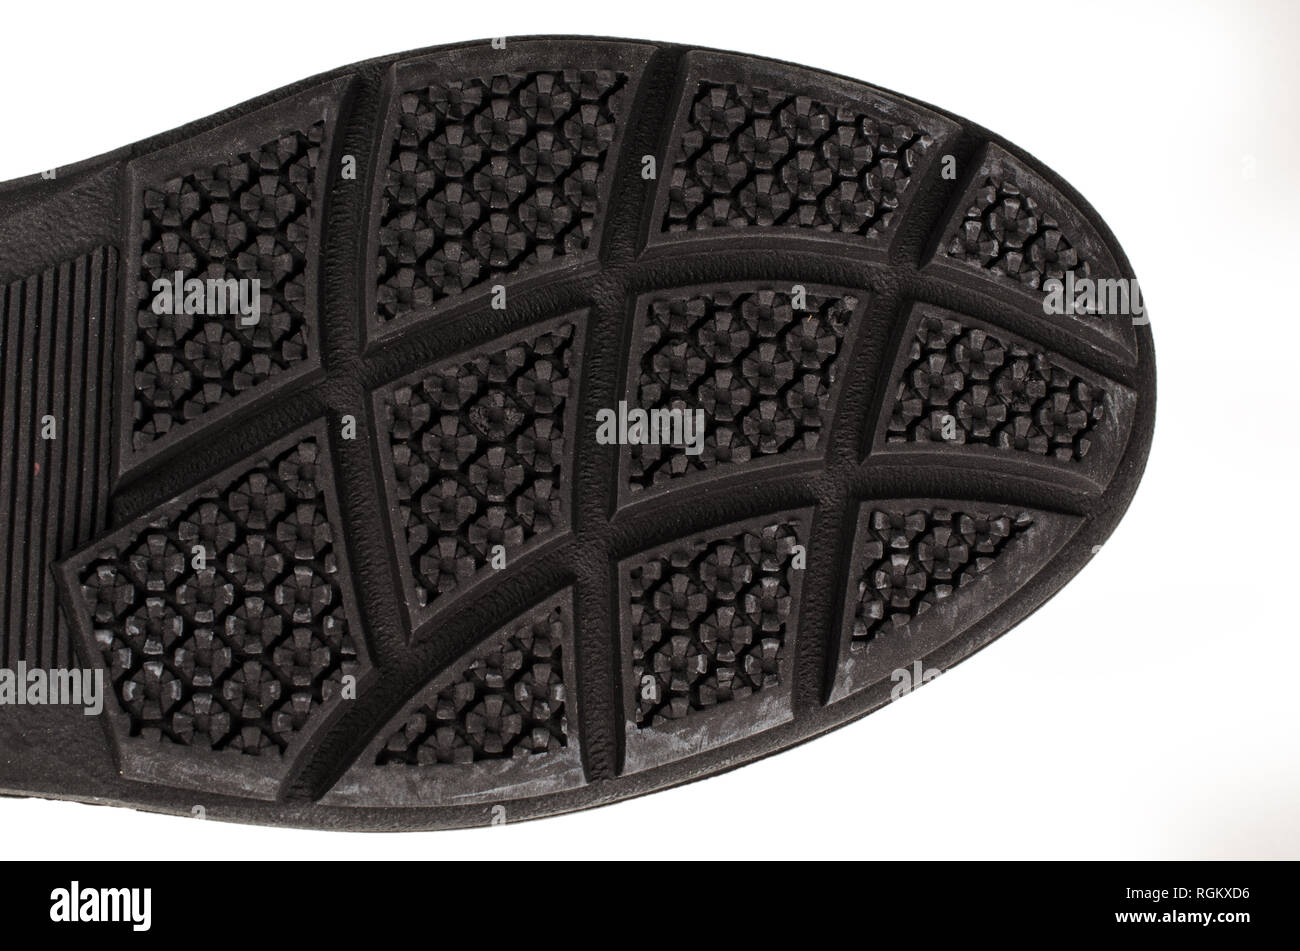 Rugged rubberized shoe sole with a rough texture Stock Photo - Alamy